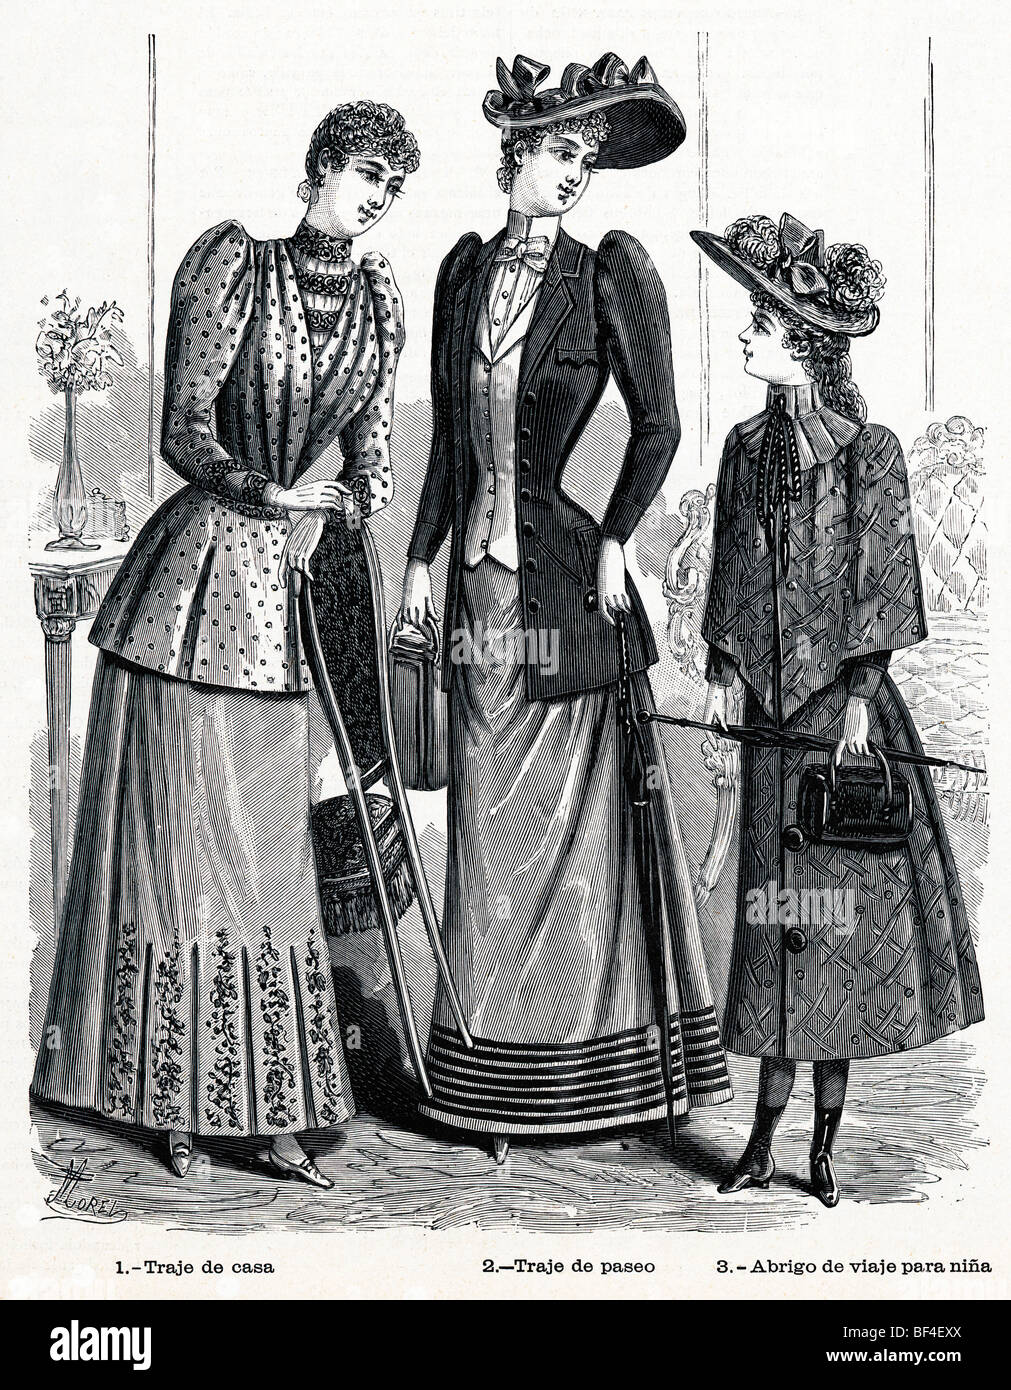 1891 Ladies Fashion, engraving of various ladies outfits from a Portugese fashion magazine Stock Photo